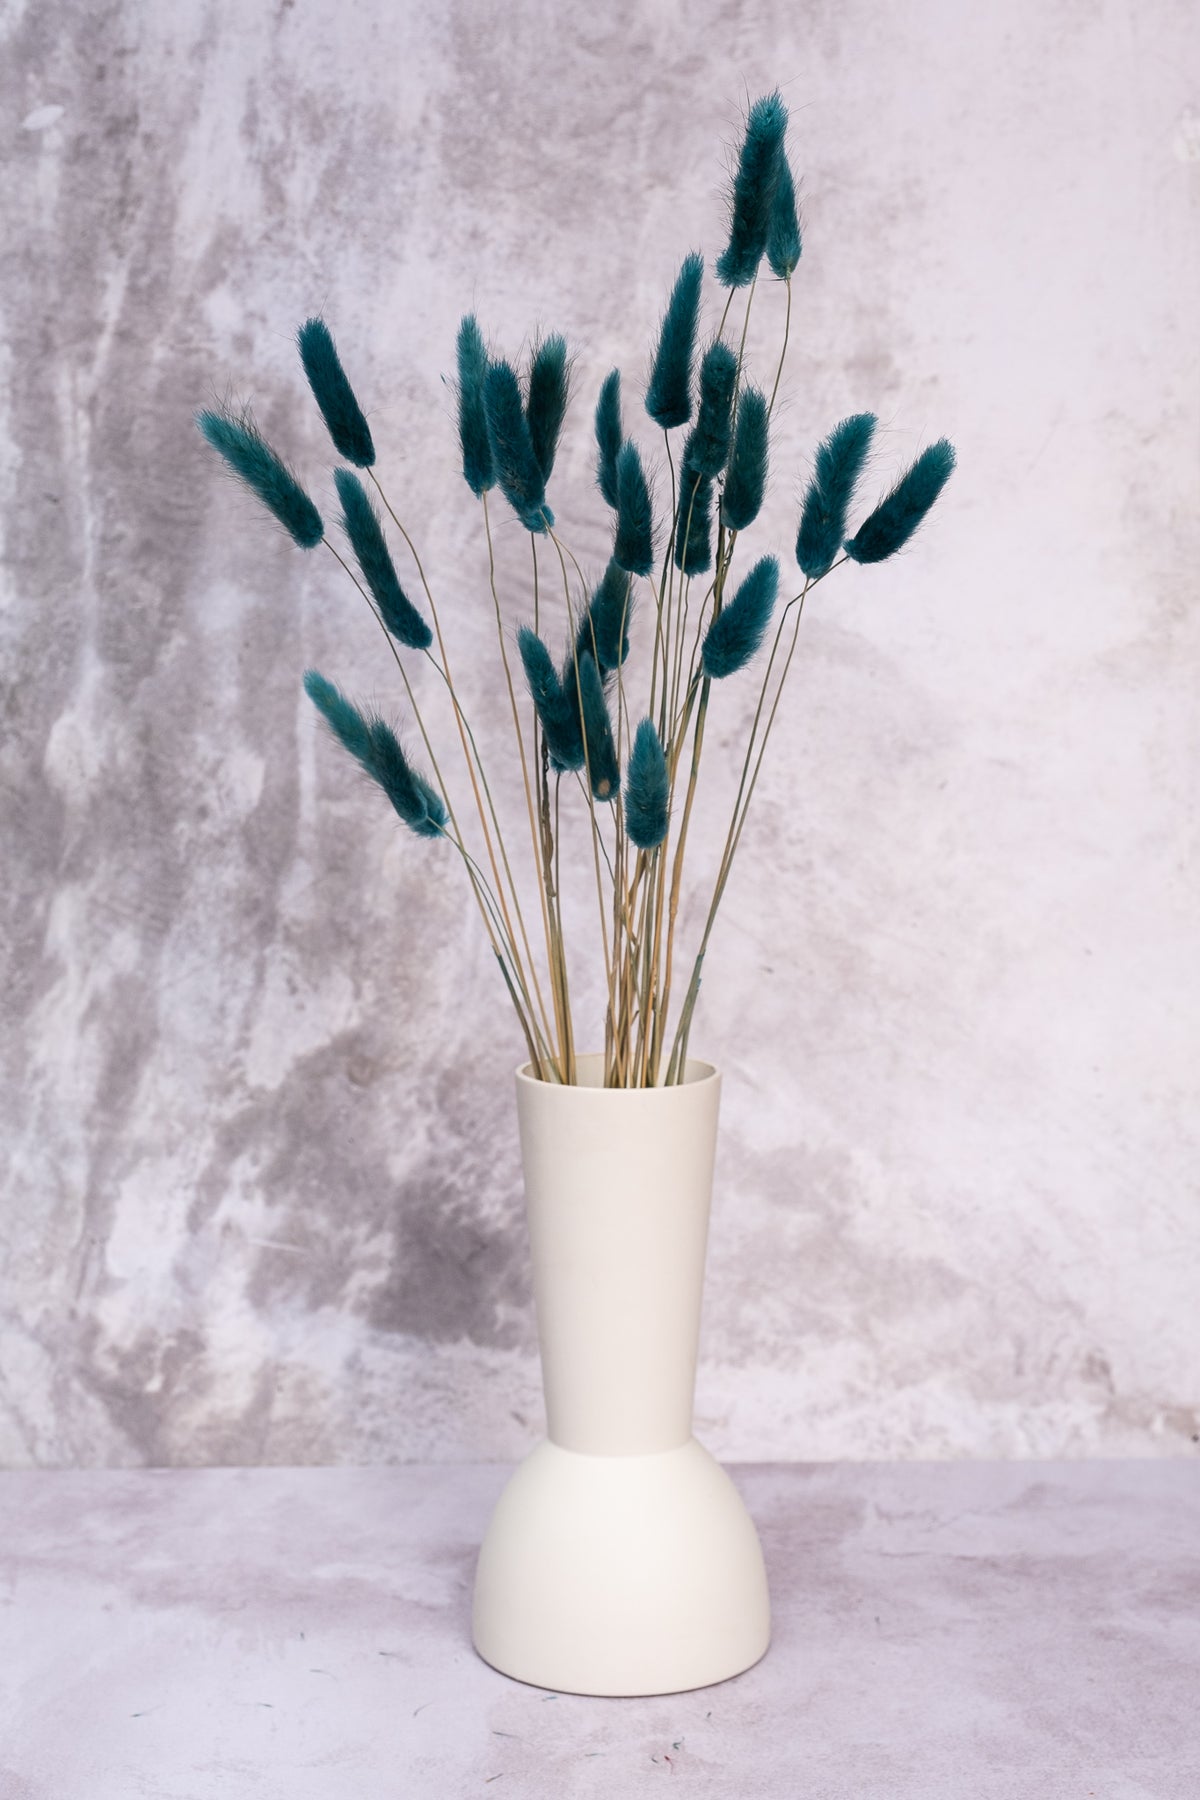 Teal Blue Bunny Tails (Large)